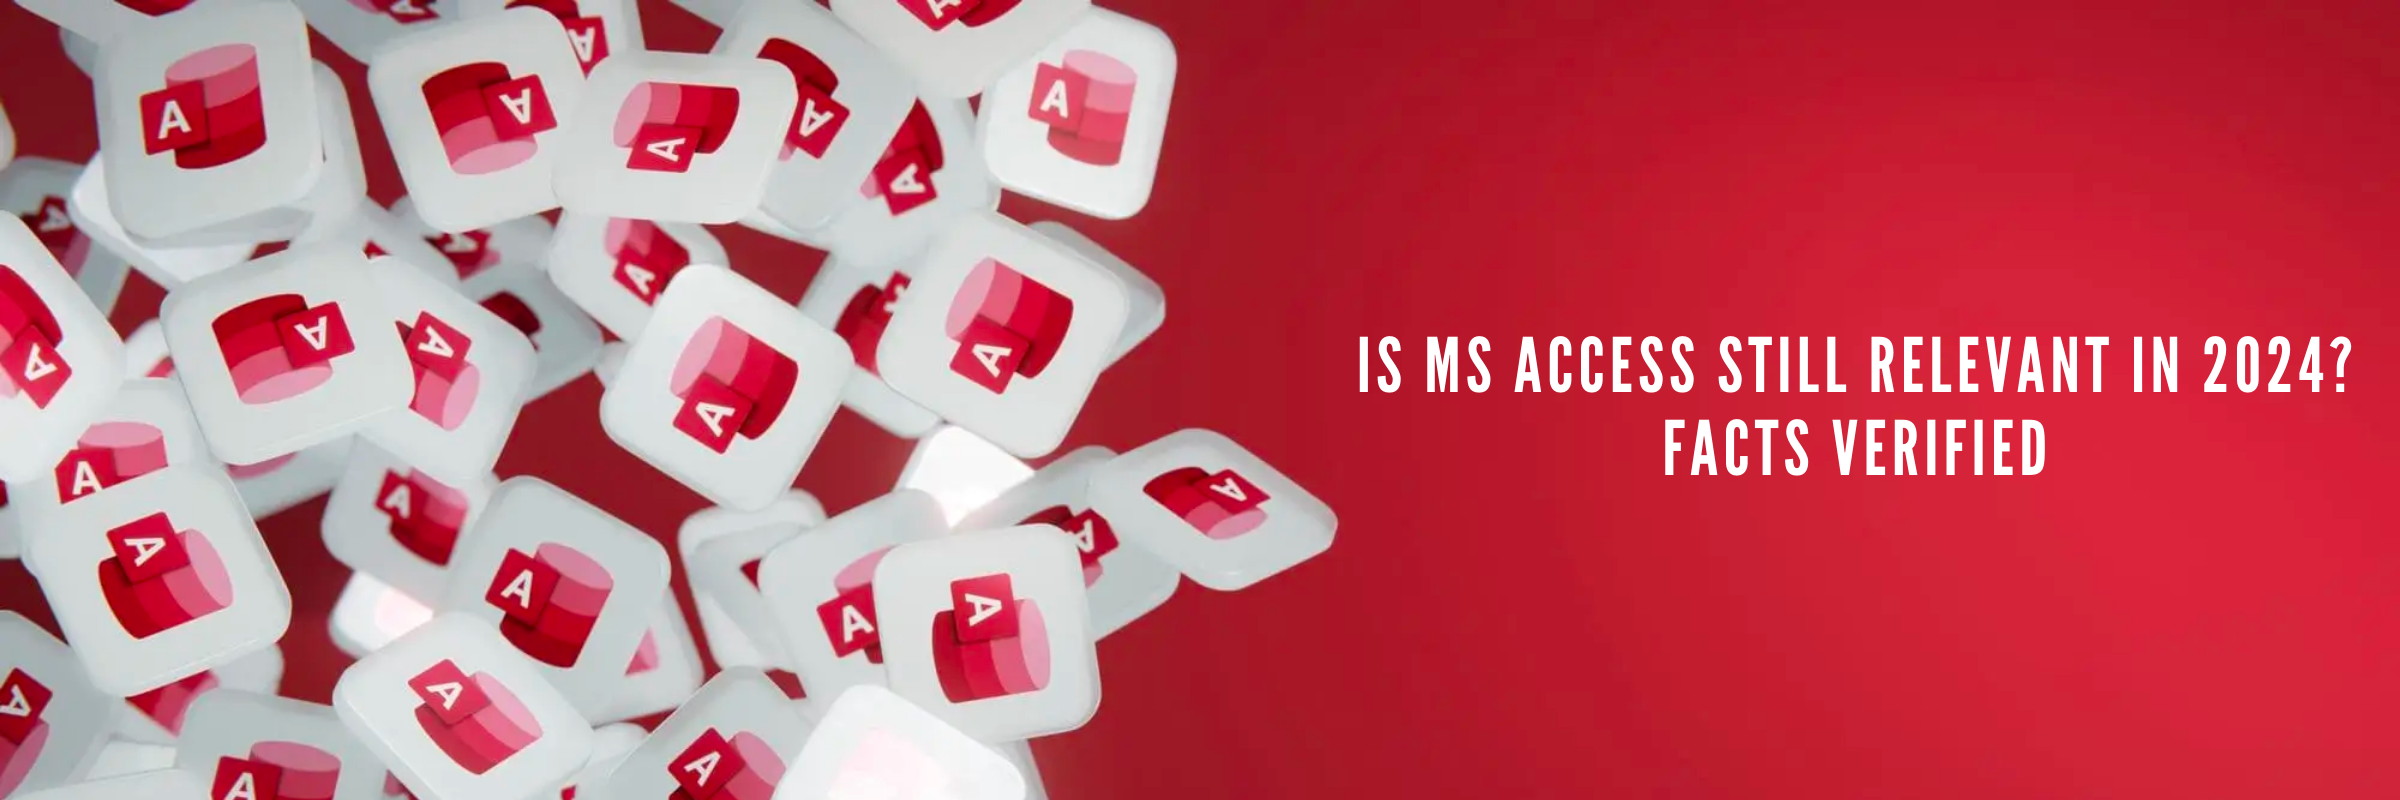 Is MS Access Still Relevant in 2024? Facts Verified